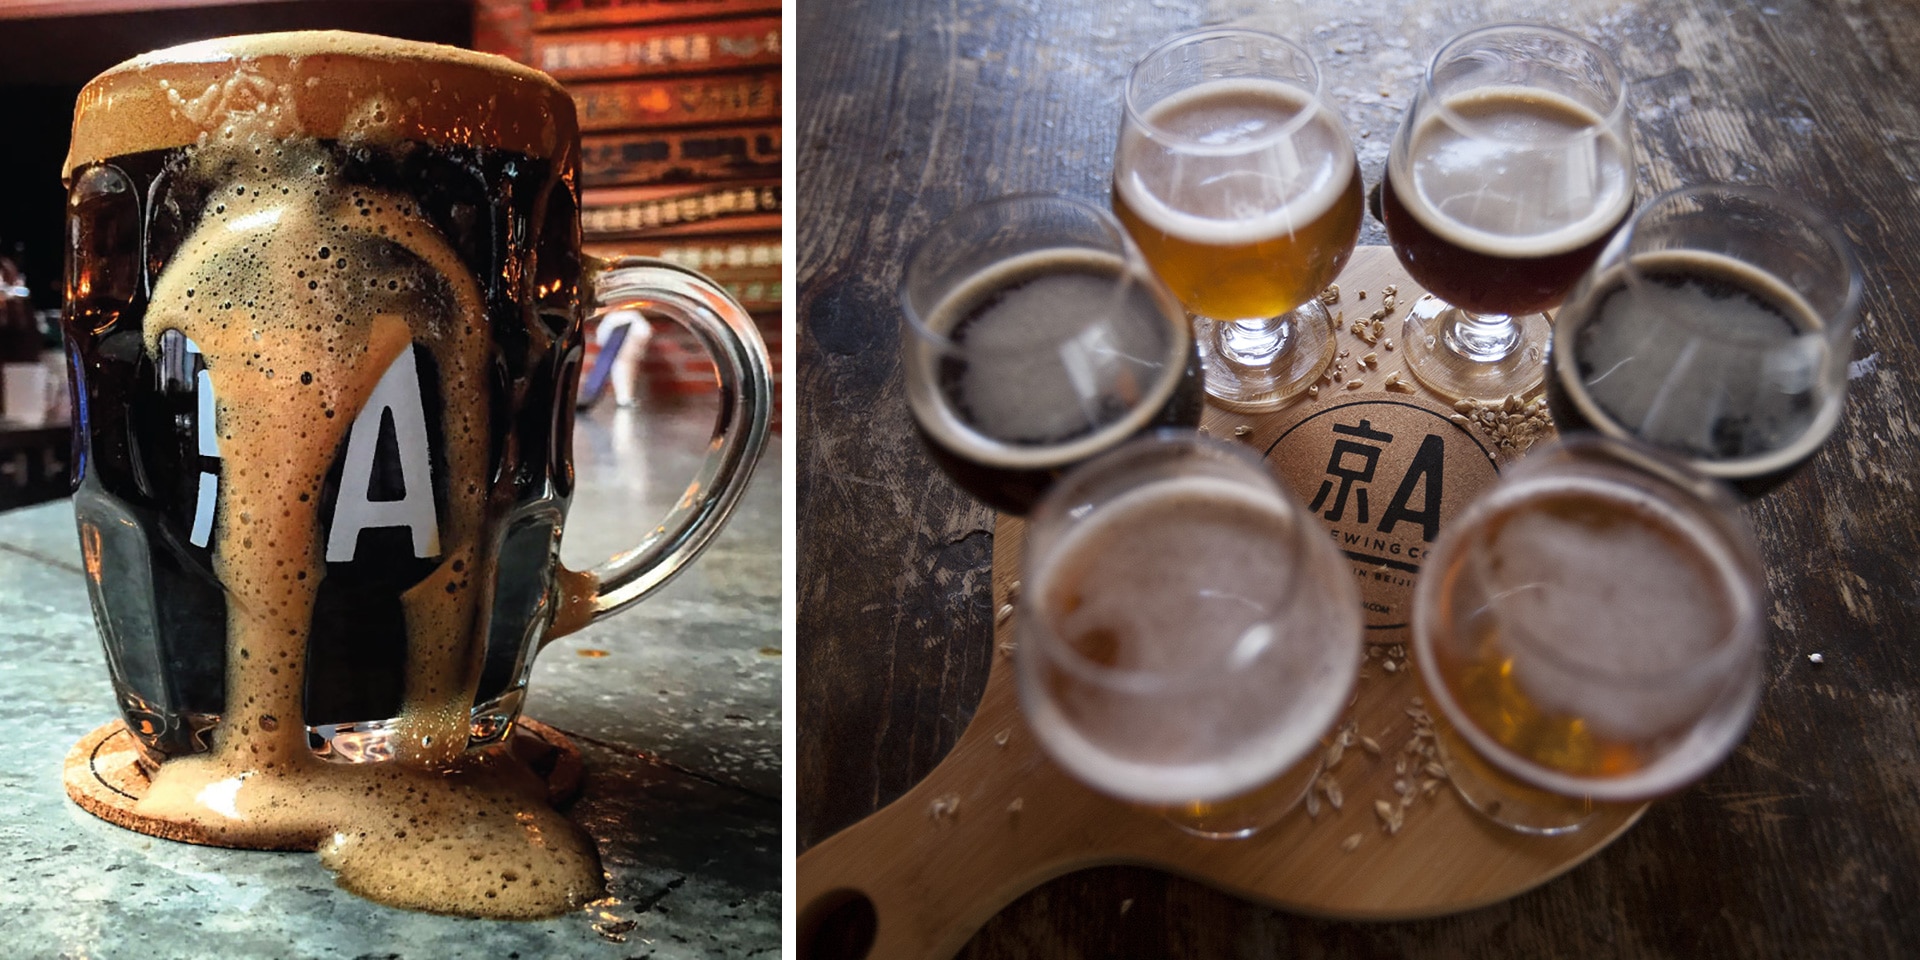 Beijing beer from Jing A Brewing Taproom.